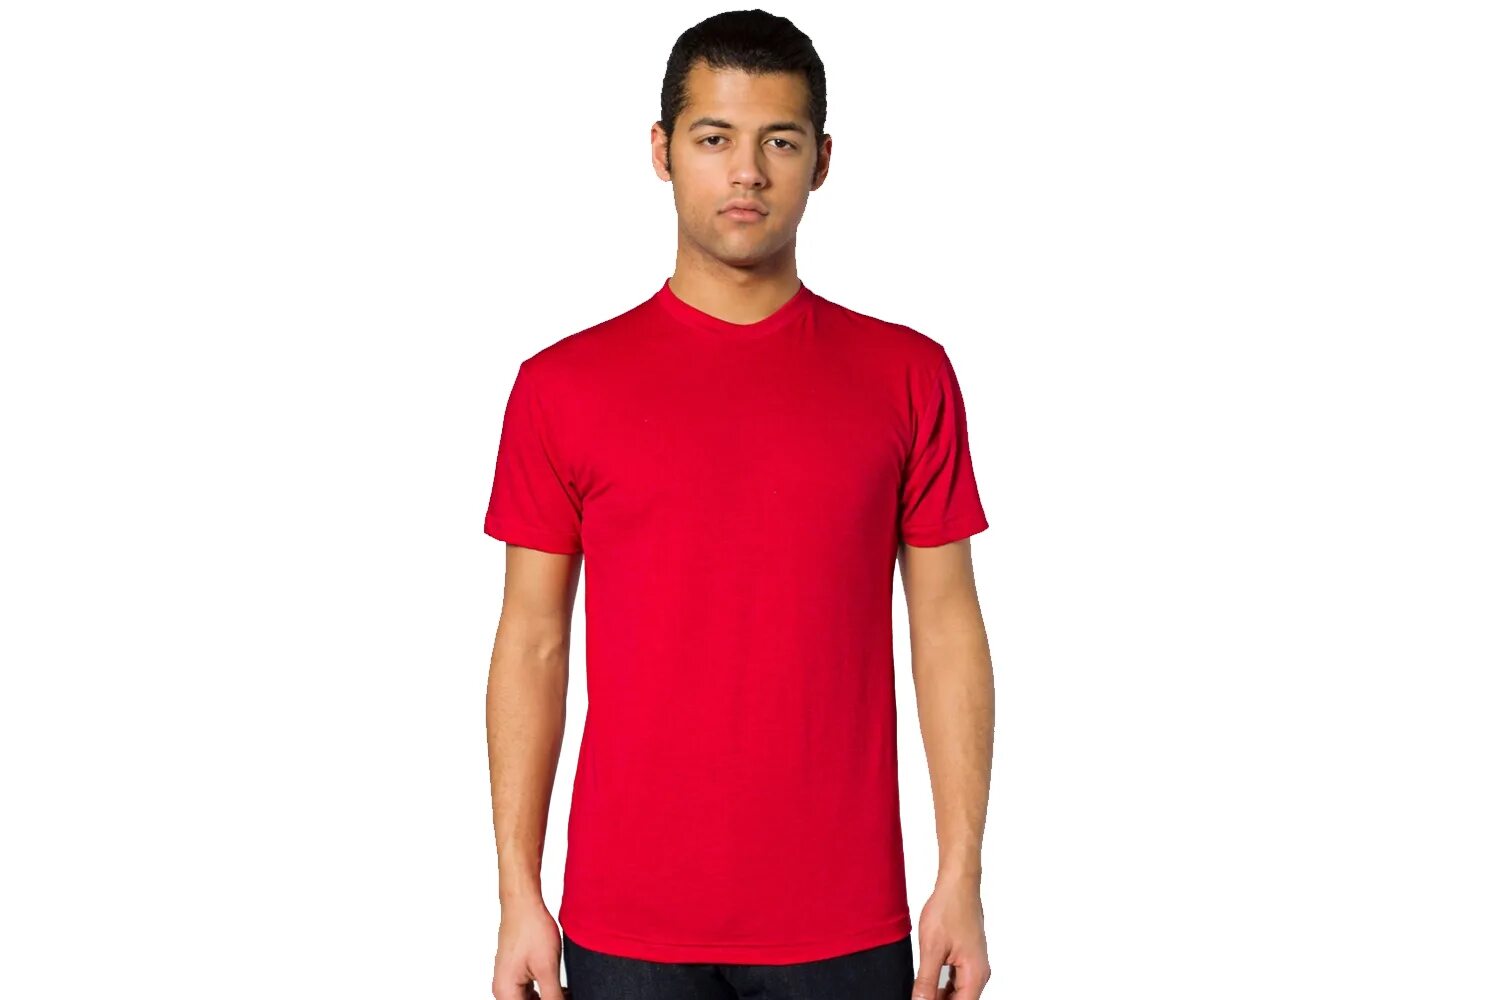 Order top. Color Crew Red. Armani Exchange t-Shirt Crew-Neck short Sleeve man. Short sleeved Colorings.